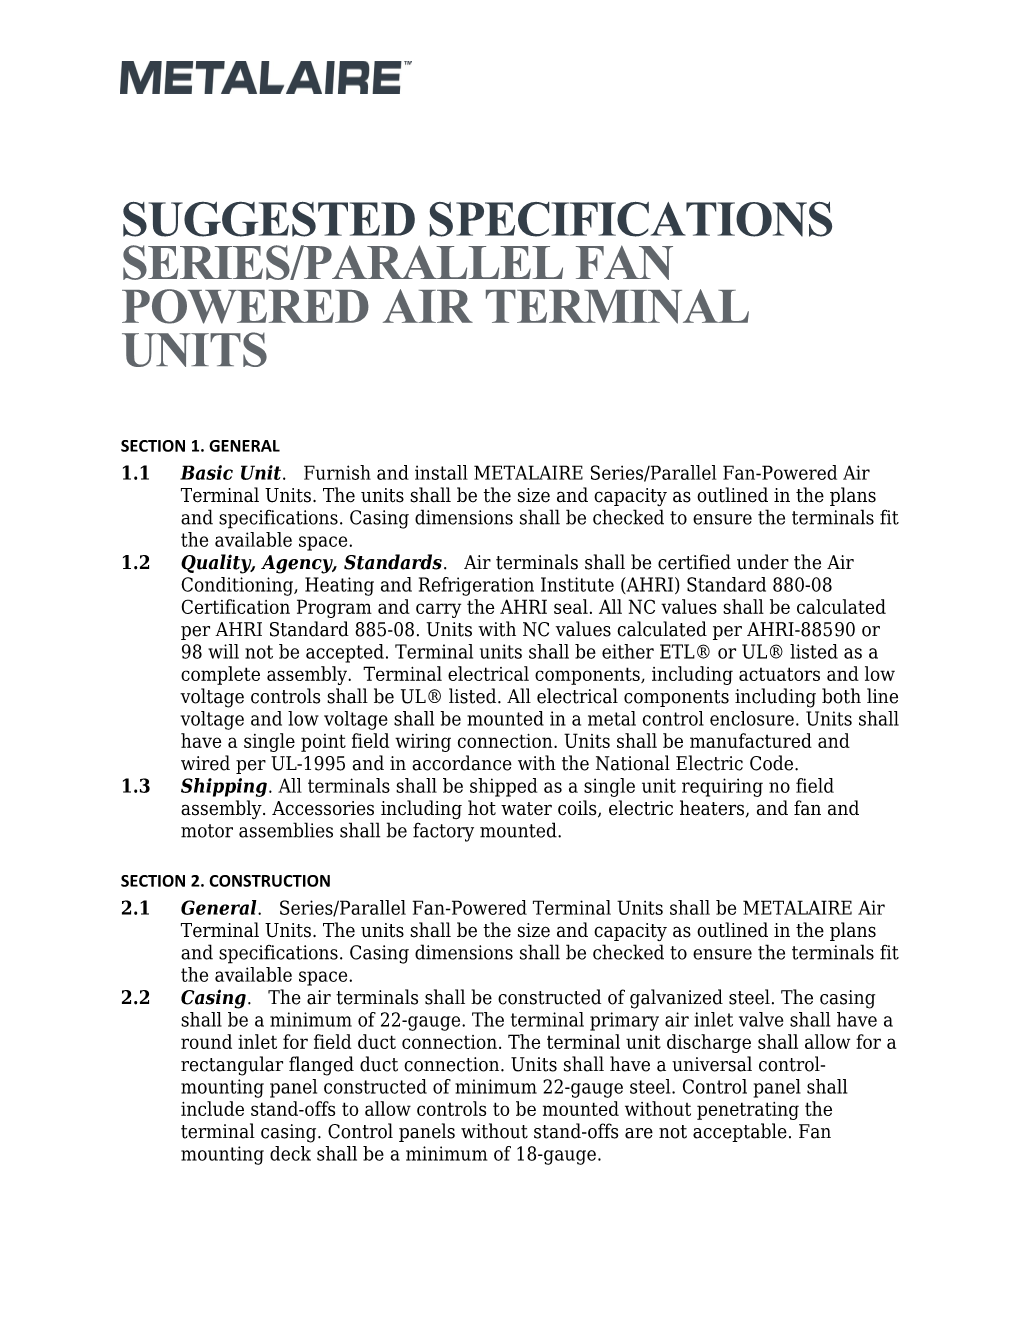 Suggested Specifications Series/Parallel Fan Poweredair Terminalunits